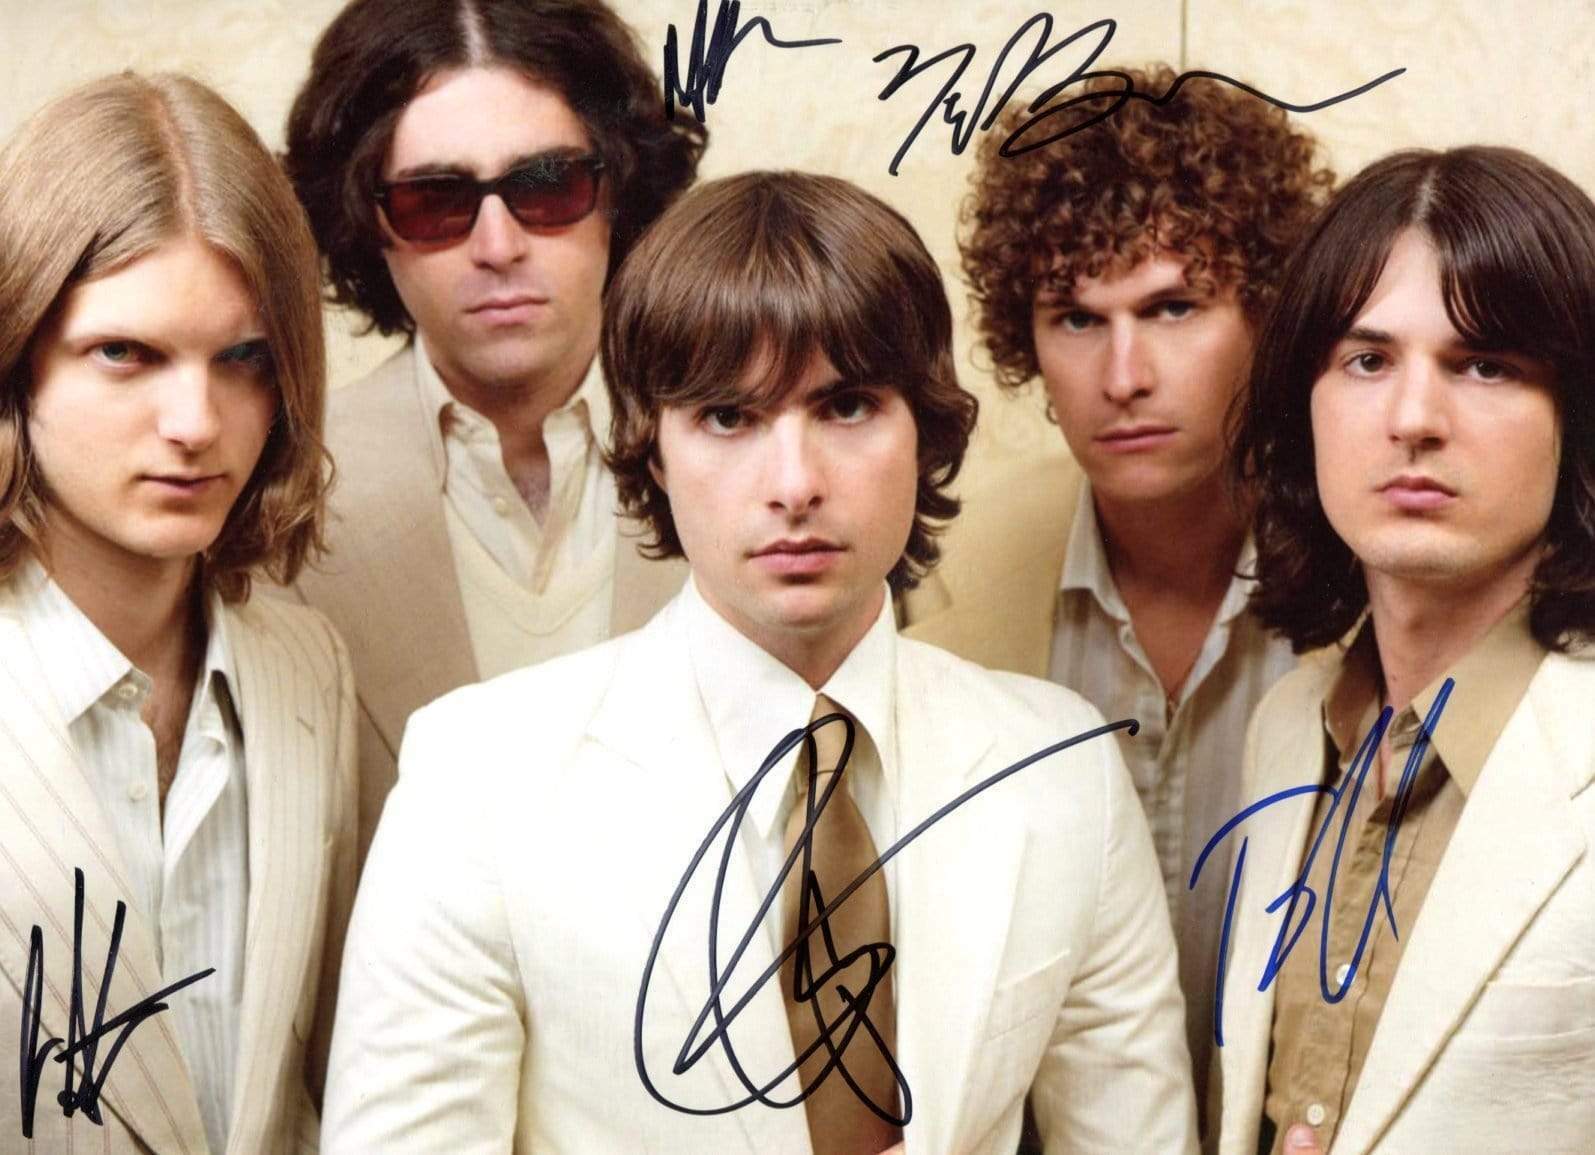 Rooney ROCK BAND autographs, In-Person signed photo